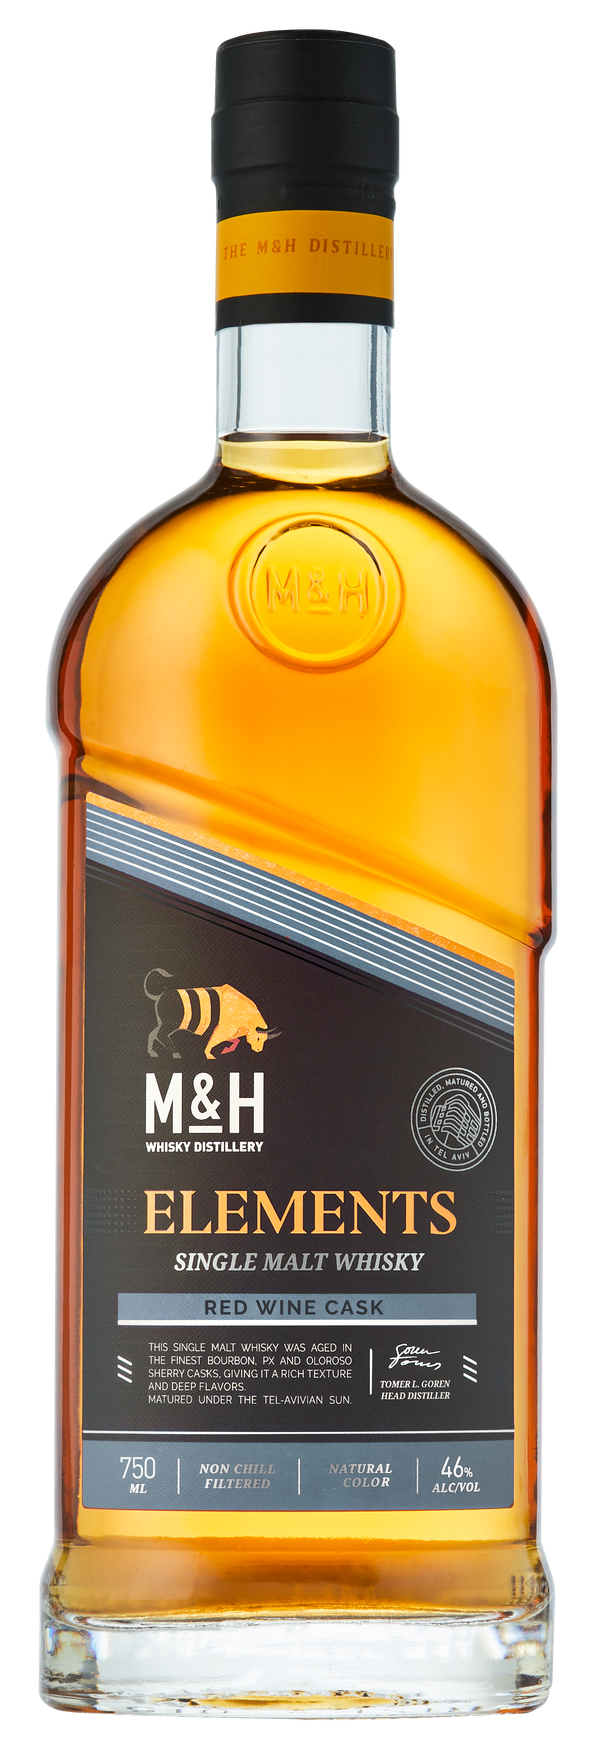 The M and H Distillery Milk and Honey Elements Red Wine Cask Single Malt Whisky 750ml